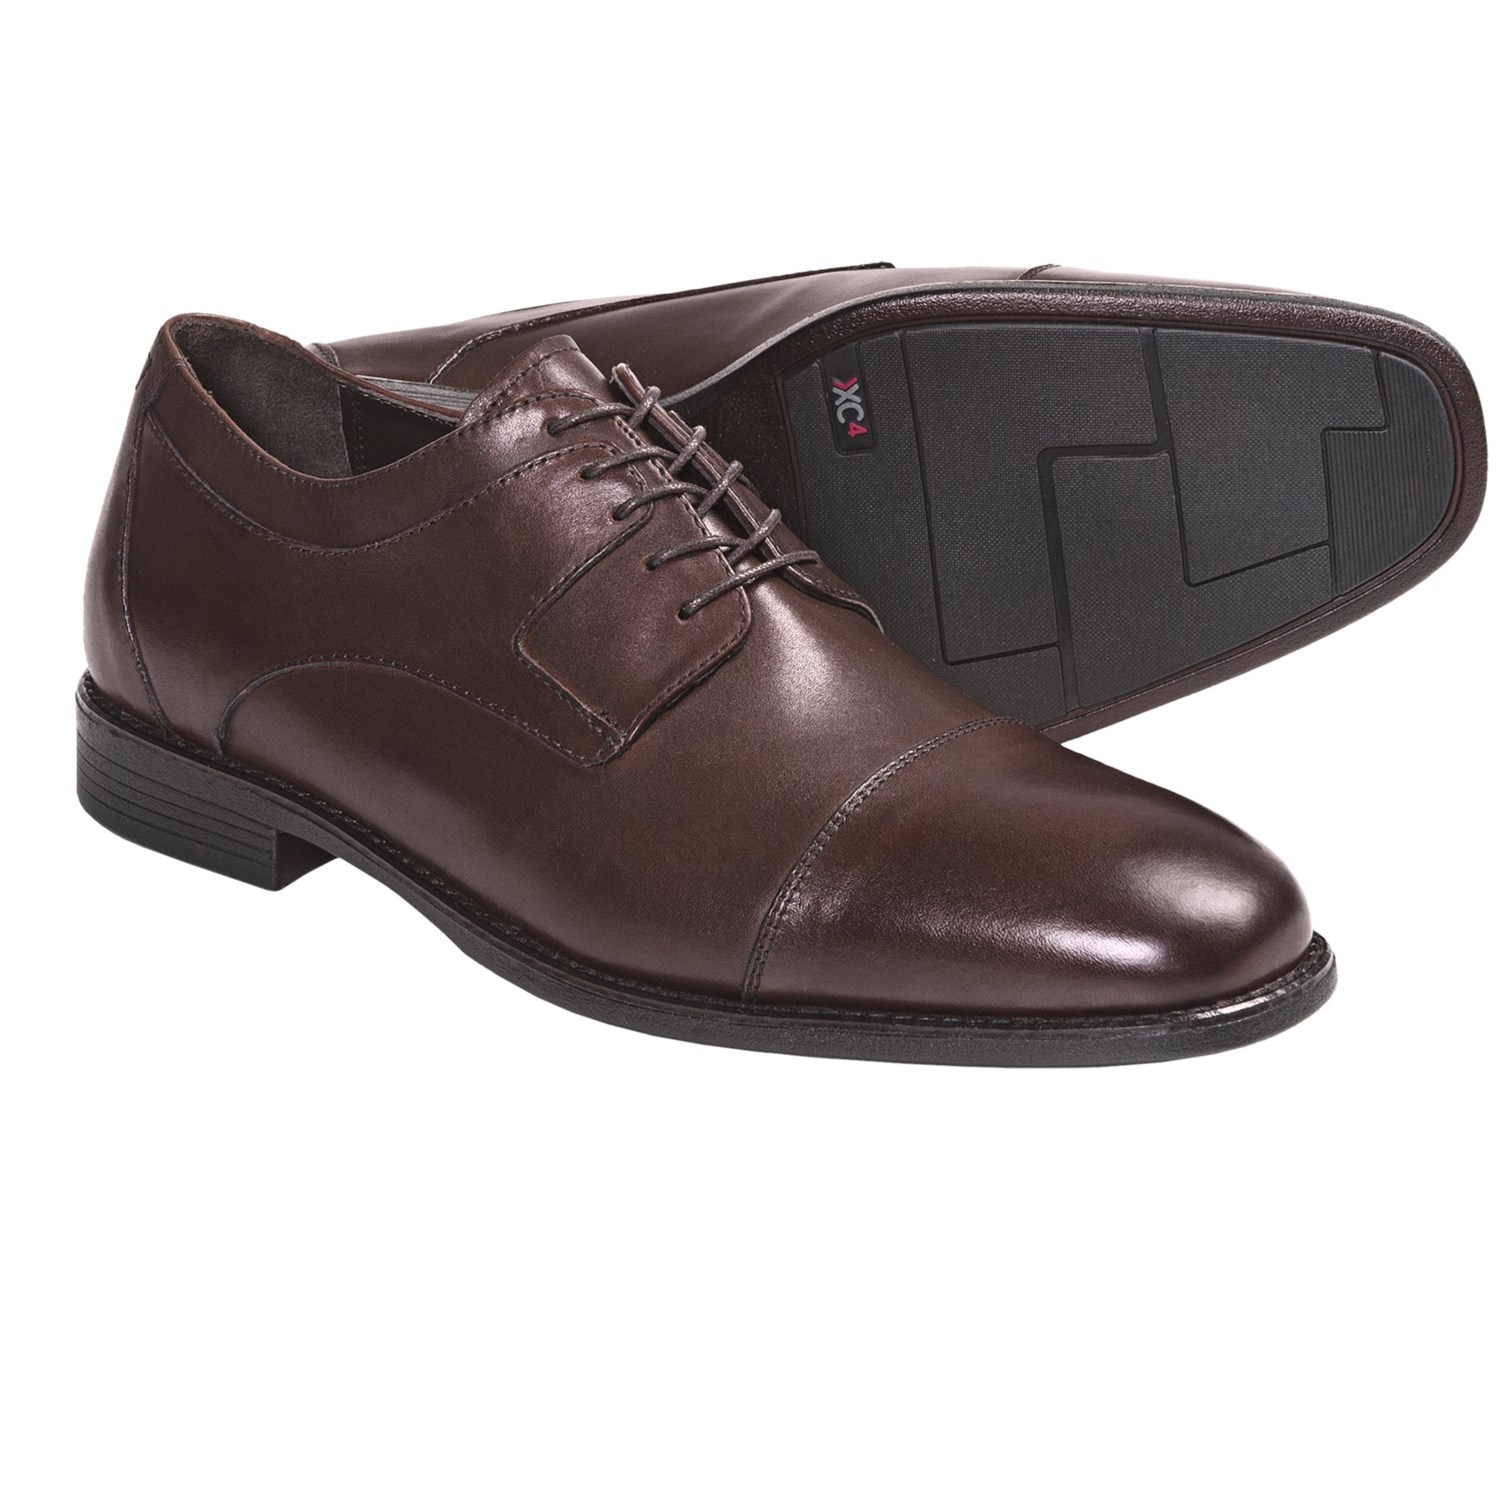 johnston-and-murphy-suffolk-cap-toe-shoes-waterproof-oxfords-for-men ...